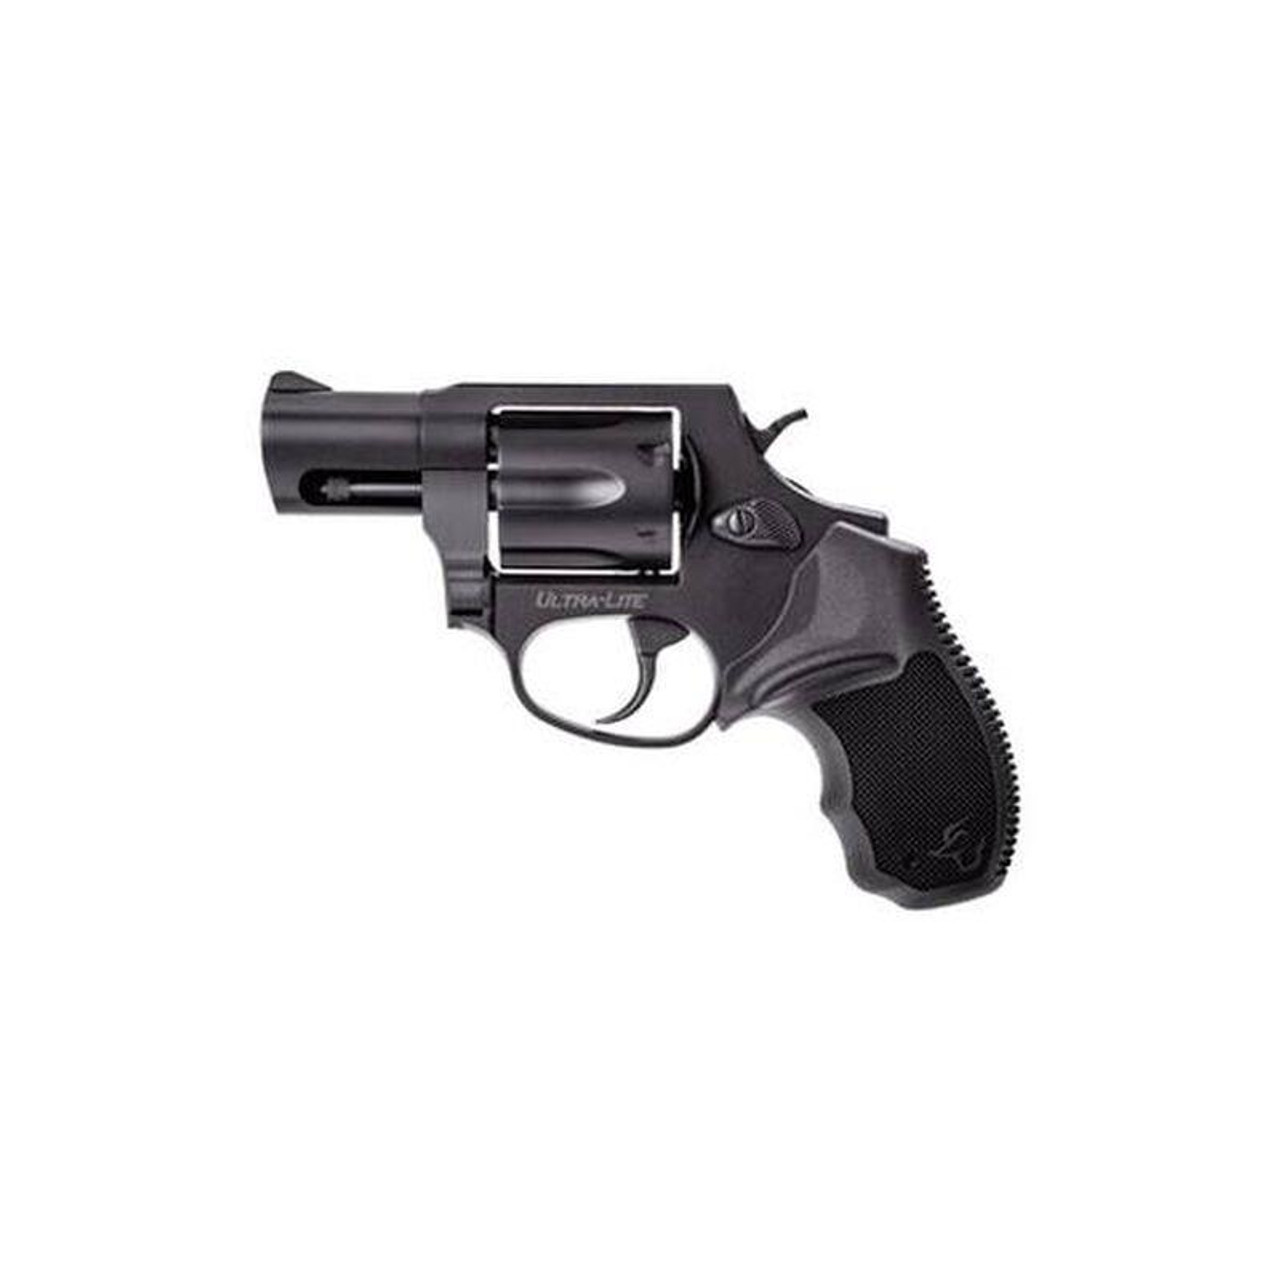 856 Revolver .38 Special +P Black/Stainless Single/Double-Action Revolver  by Taurus at Fleet Farm